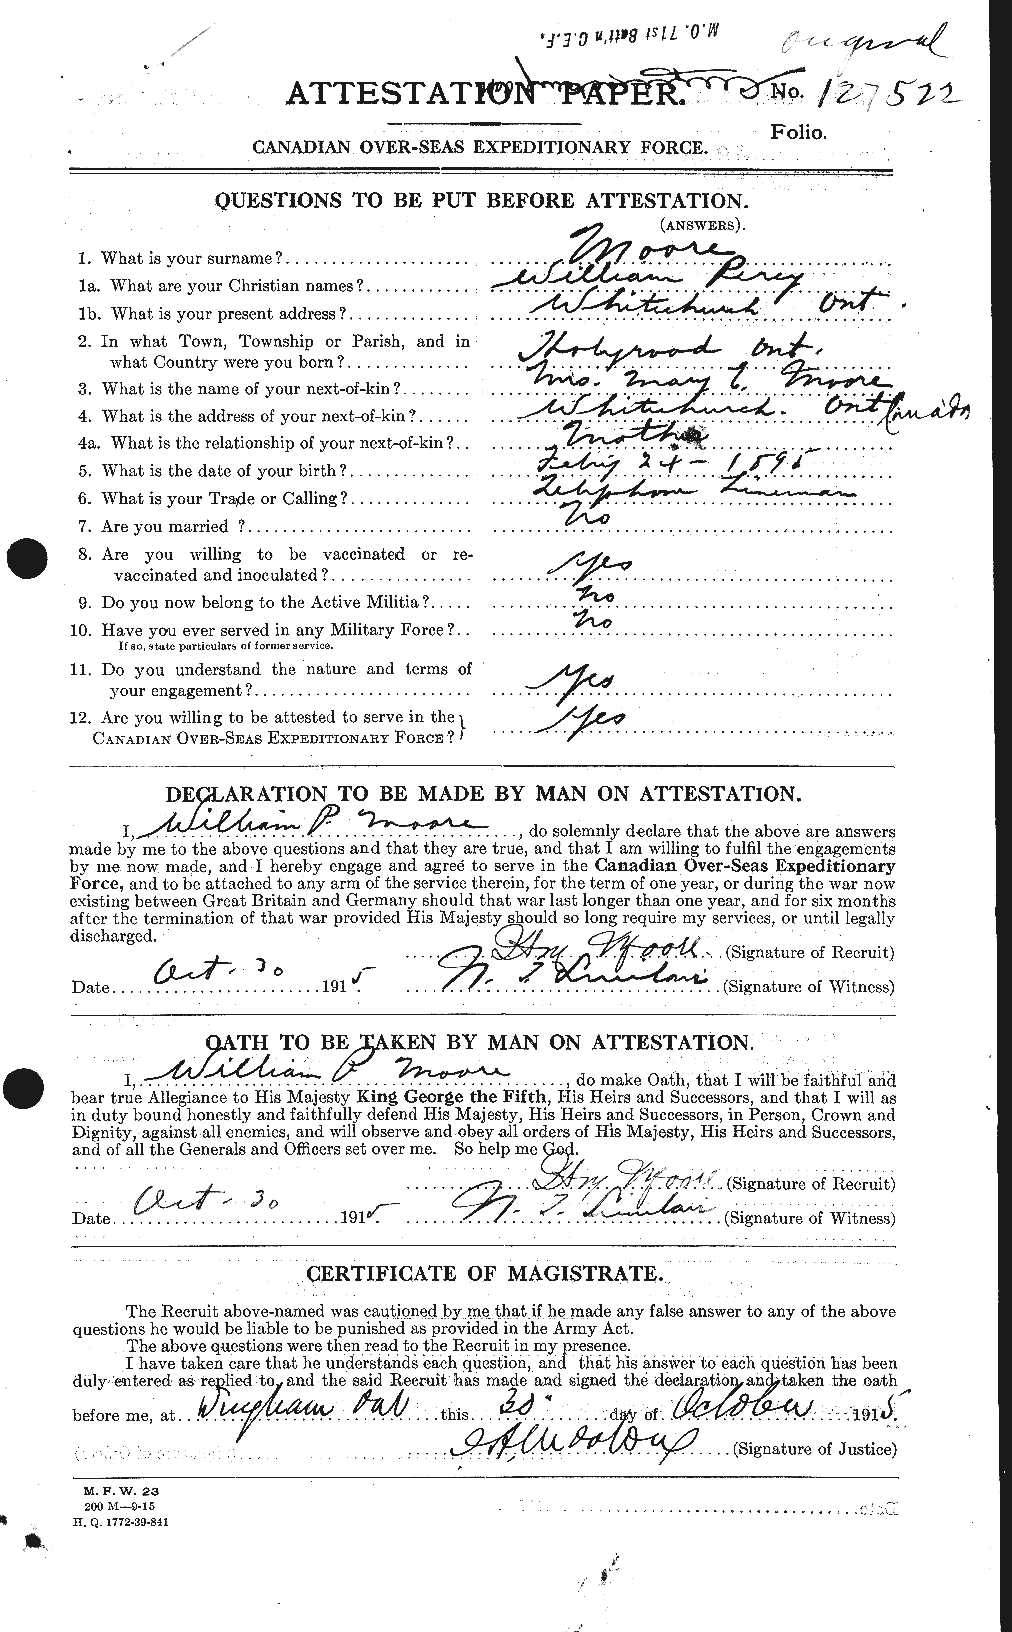 Personnel Records of the First World War - CEF 505860a